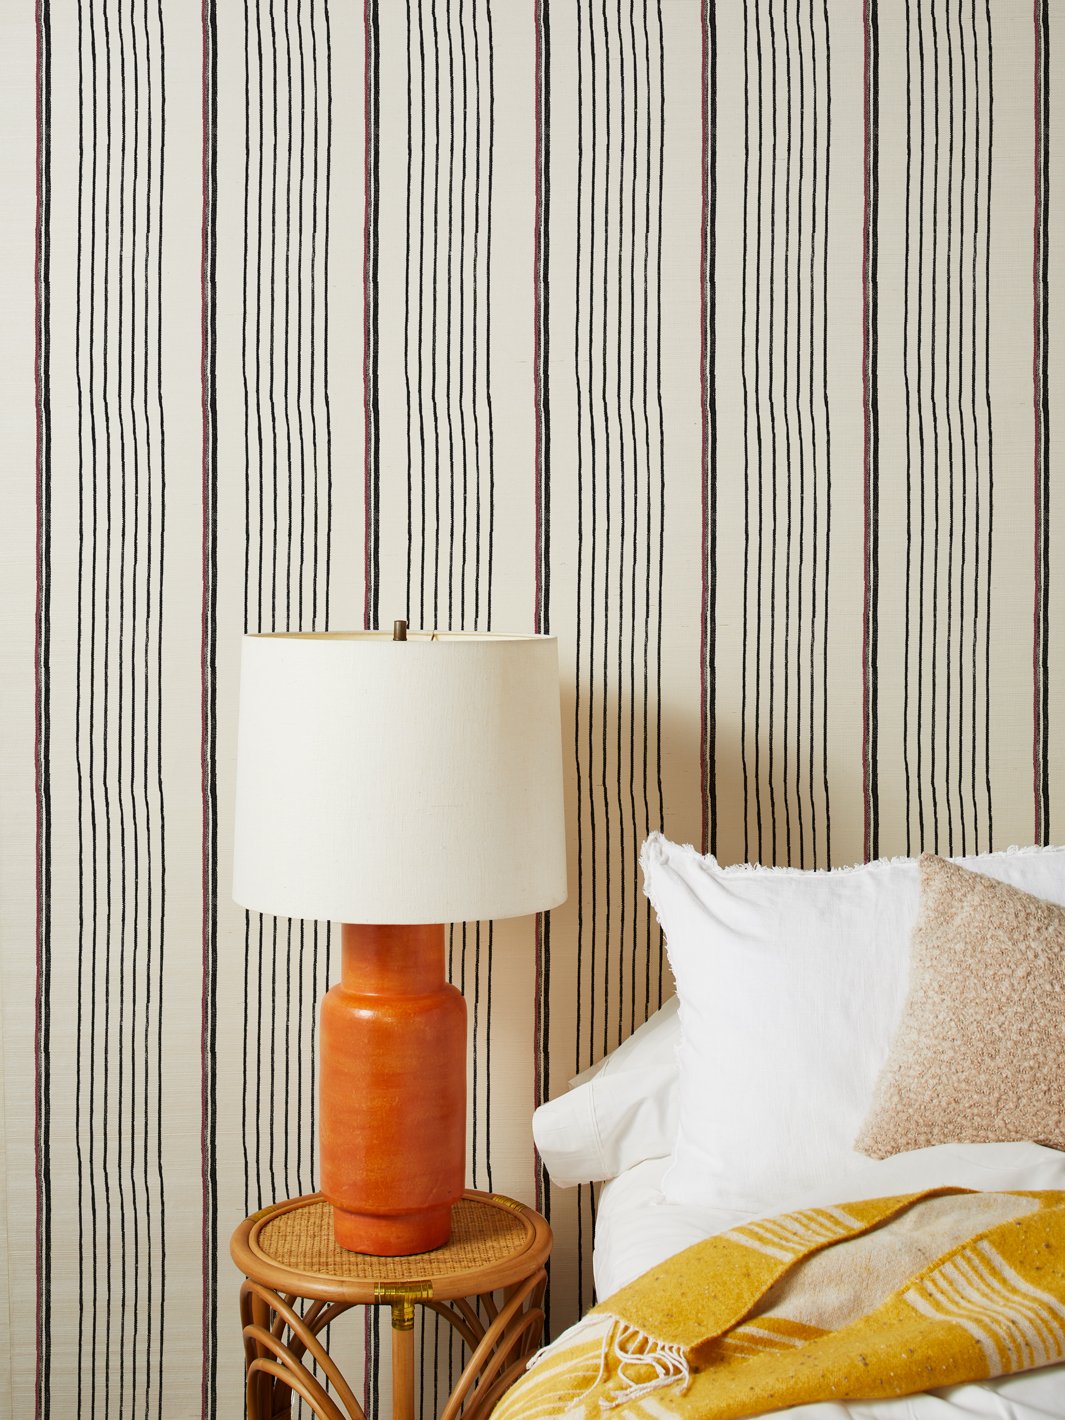 Two Tone Stripe Grasscloth Wallpaper by Nathan Turner  Creamsicle